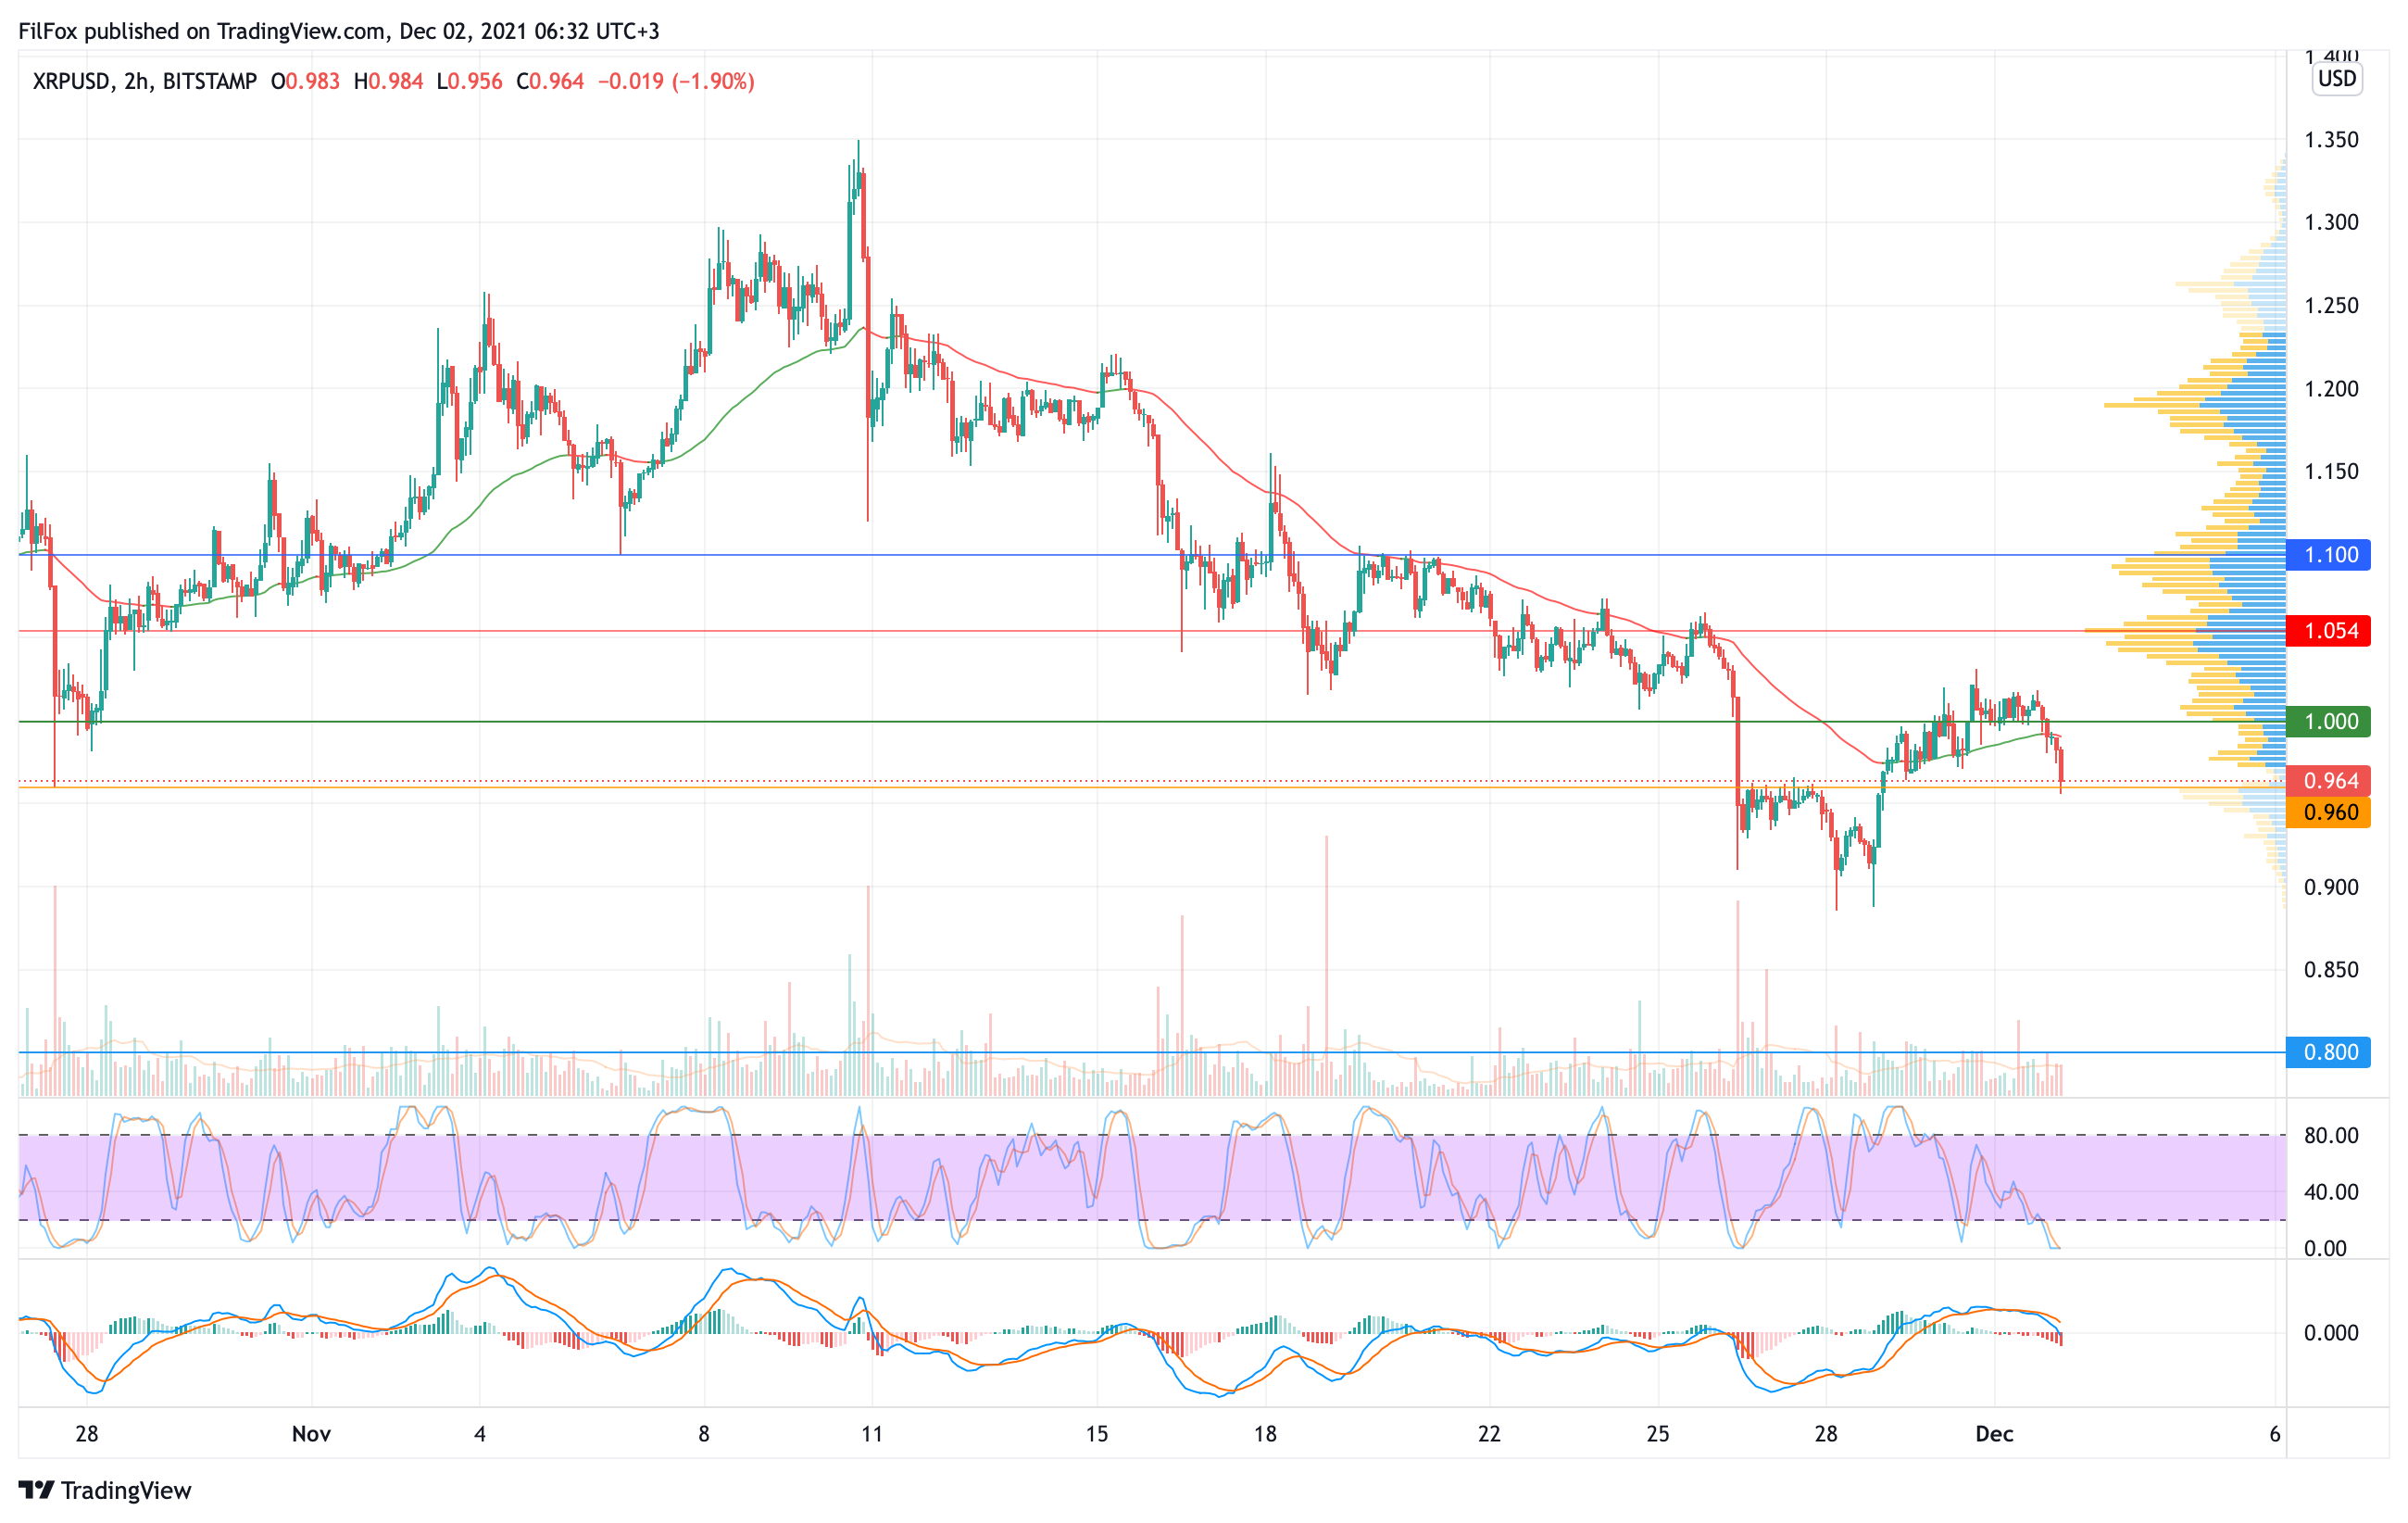 Analysis of prices for Bitcoin, Ethereum, XRP for 12/02/2021